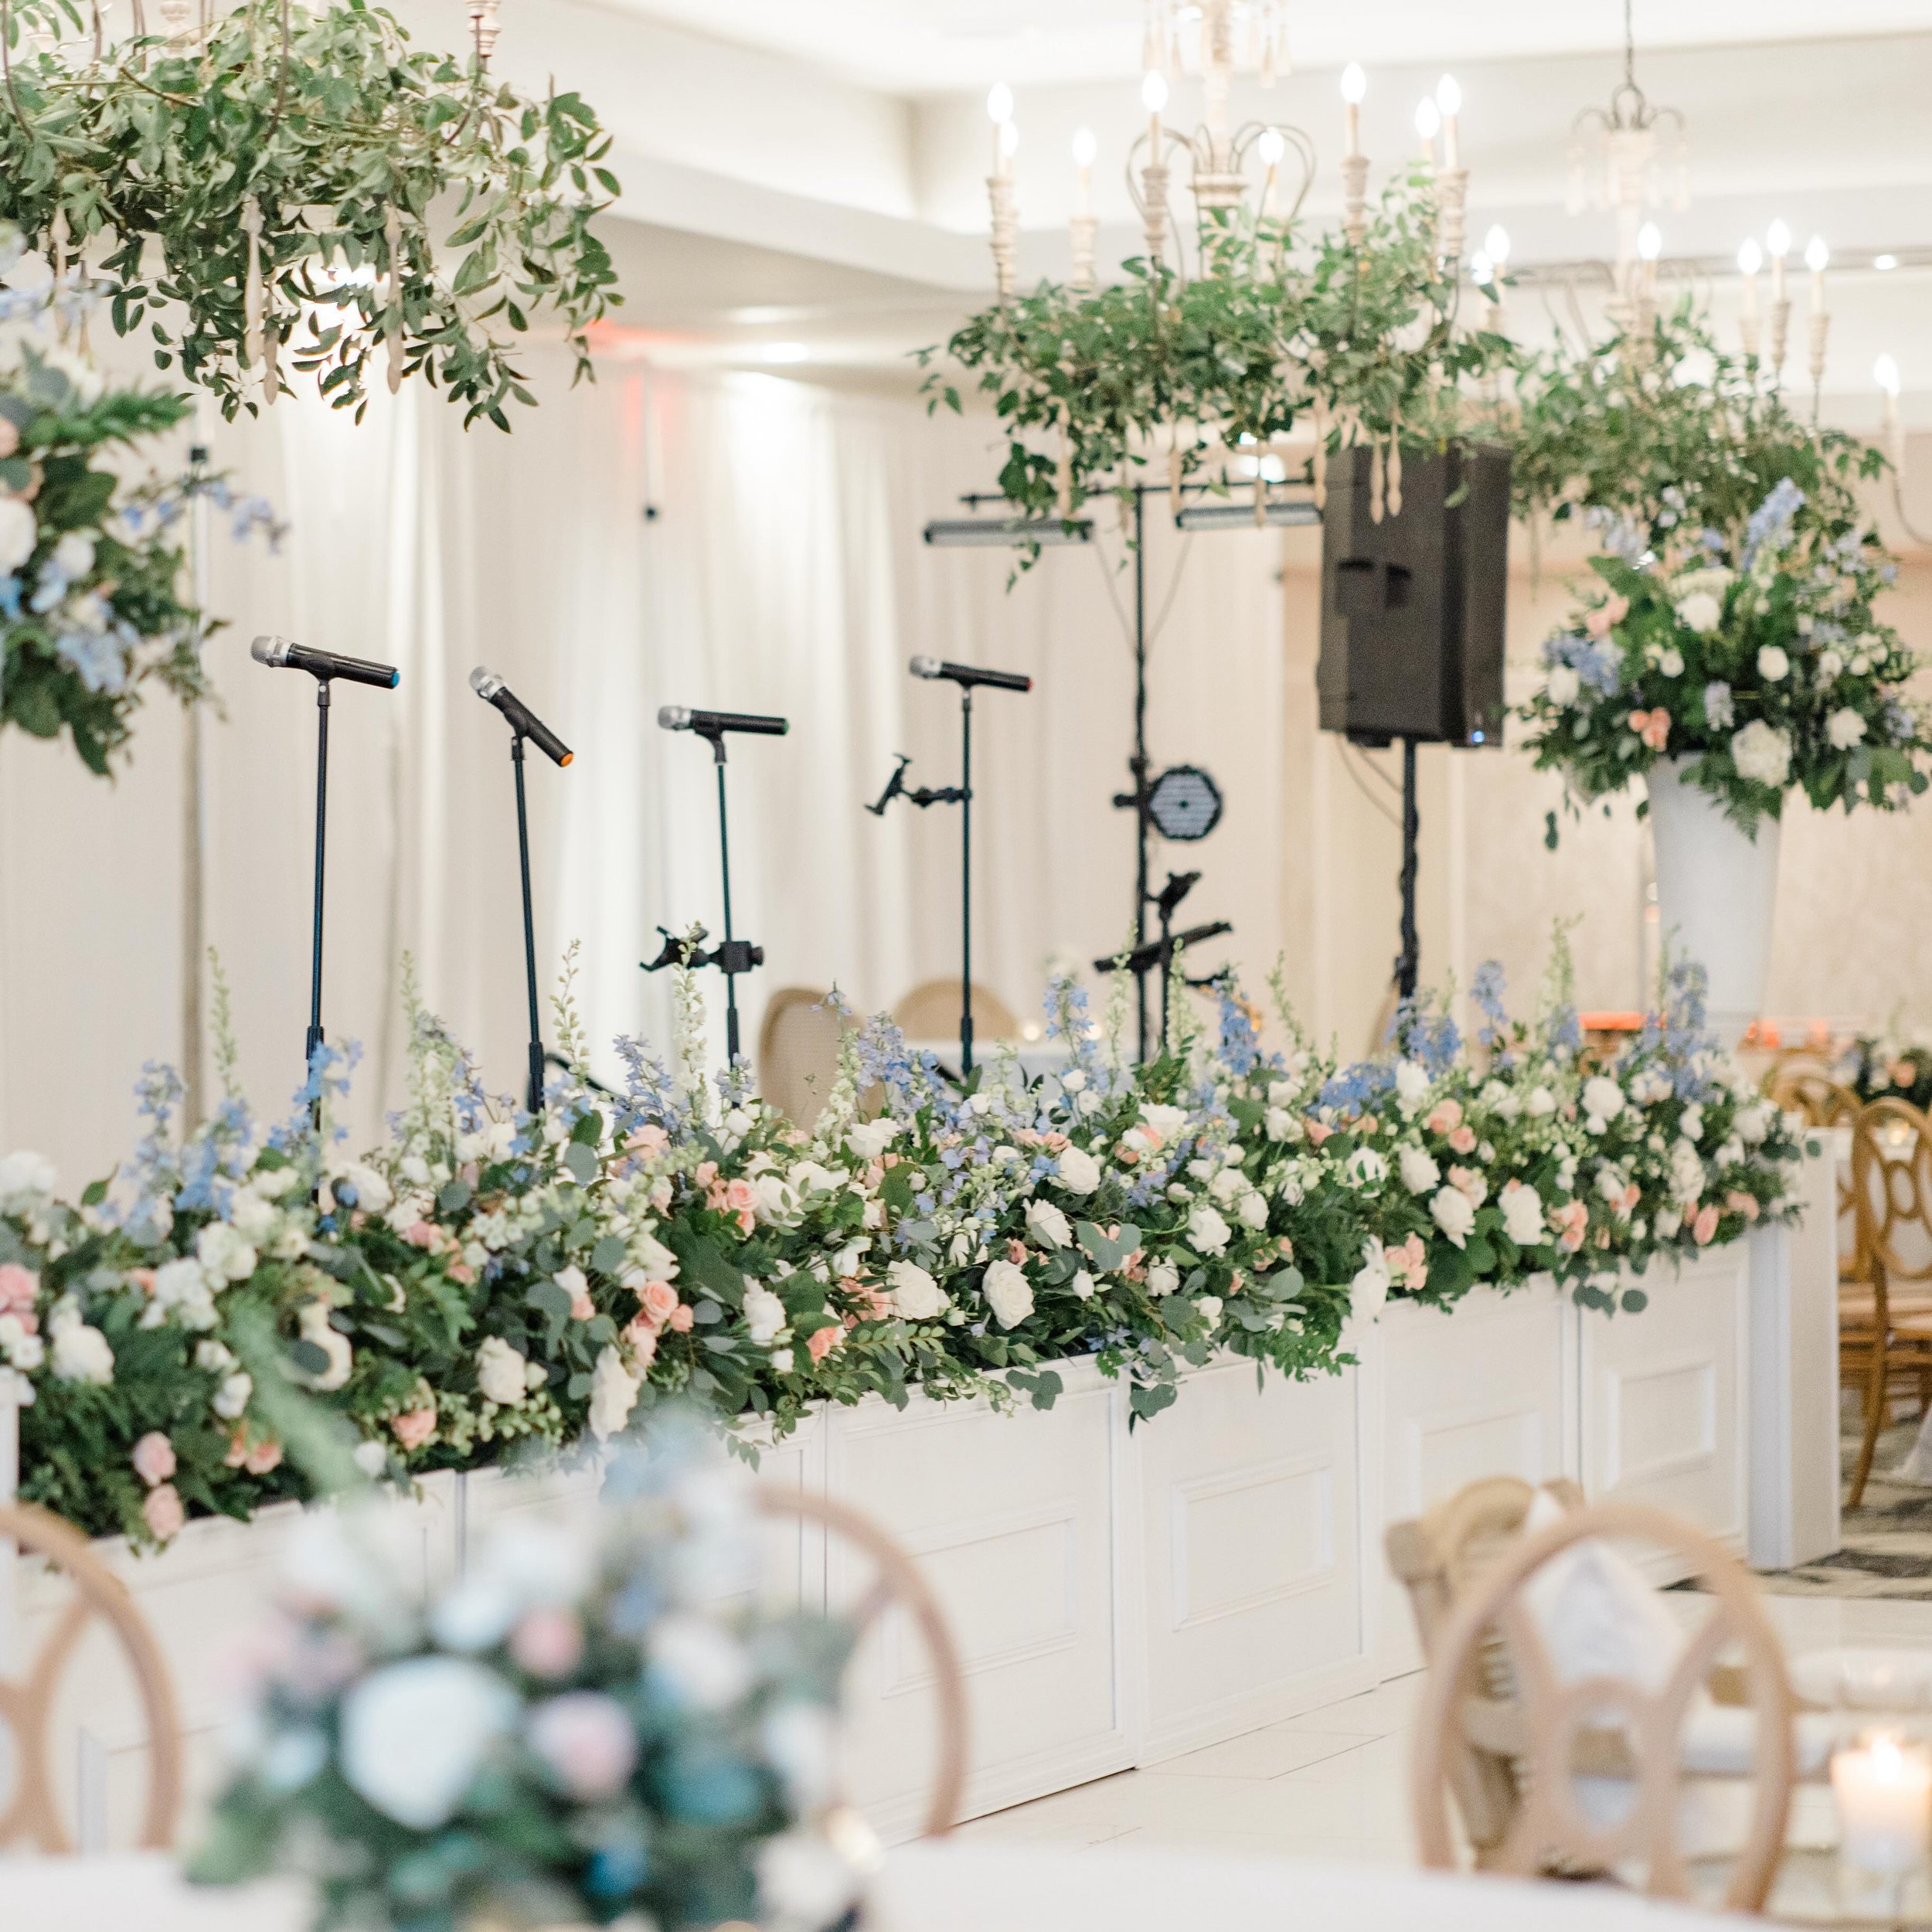 When it comes to your reception design (and budget) don&rsquo;t forget to think beyond your tablescapes &mdash; it&rsquo;s really when you are intentional about designing every area when a space has an overall cohesiveness. 

Venue + Catering &amp; B